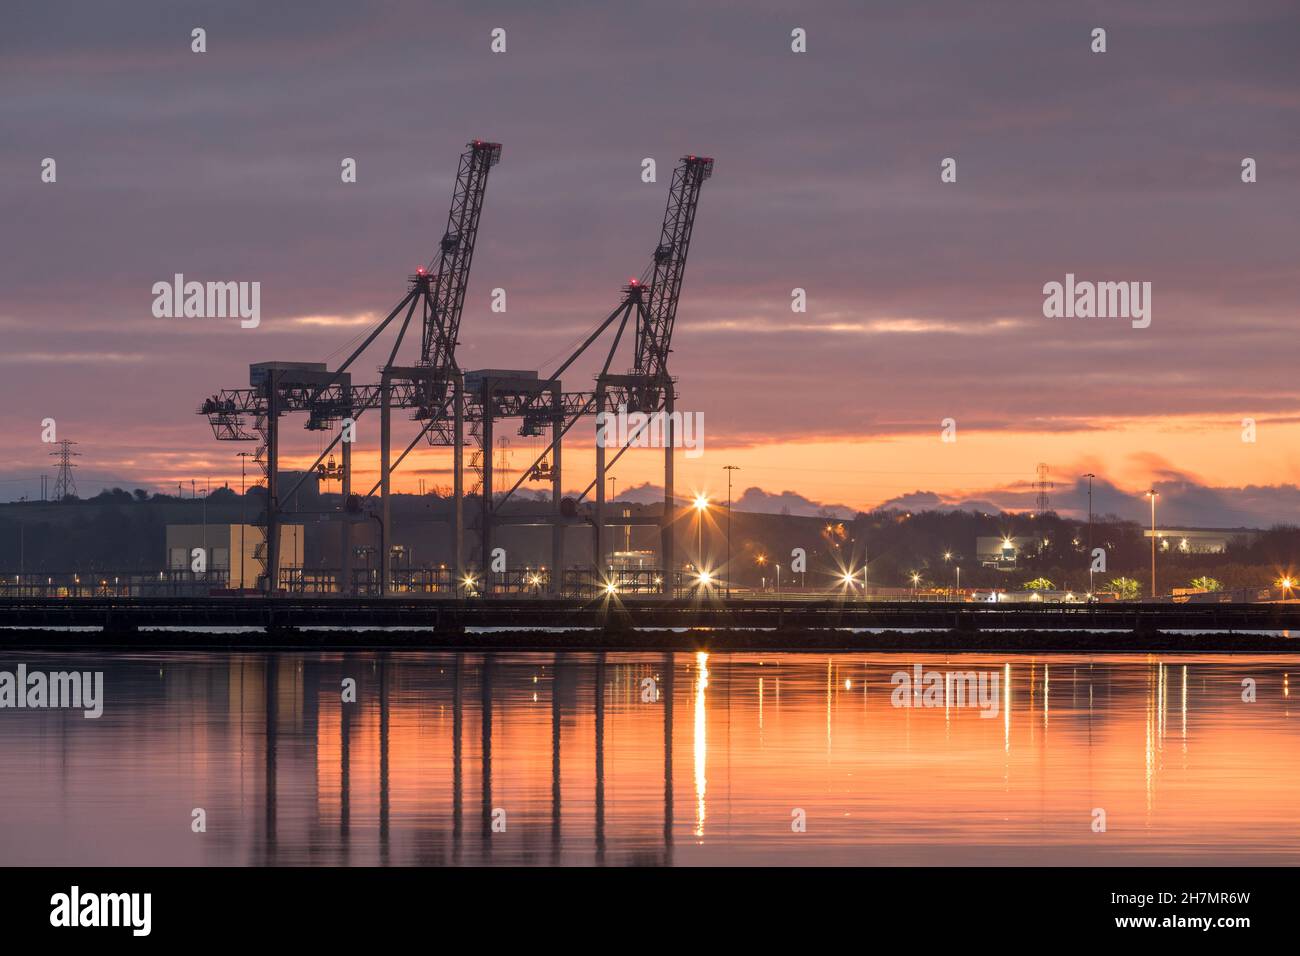 Ringaskiddy, Cork, Ireland. 24th November, 2021. Gantry cranes silhouetted by dawn light at the new Port of Cork container terminal at Ringaskiddy, Co. Cork, Ireland. - Credit; David Creedon / Alamy Live News Stock Photo